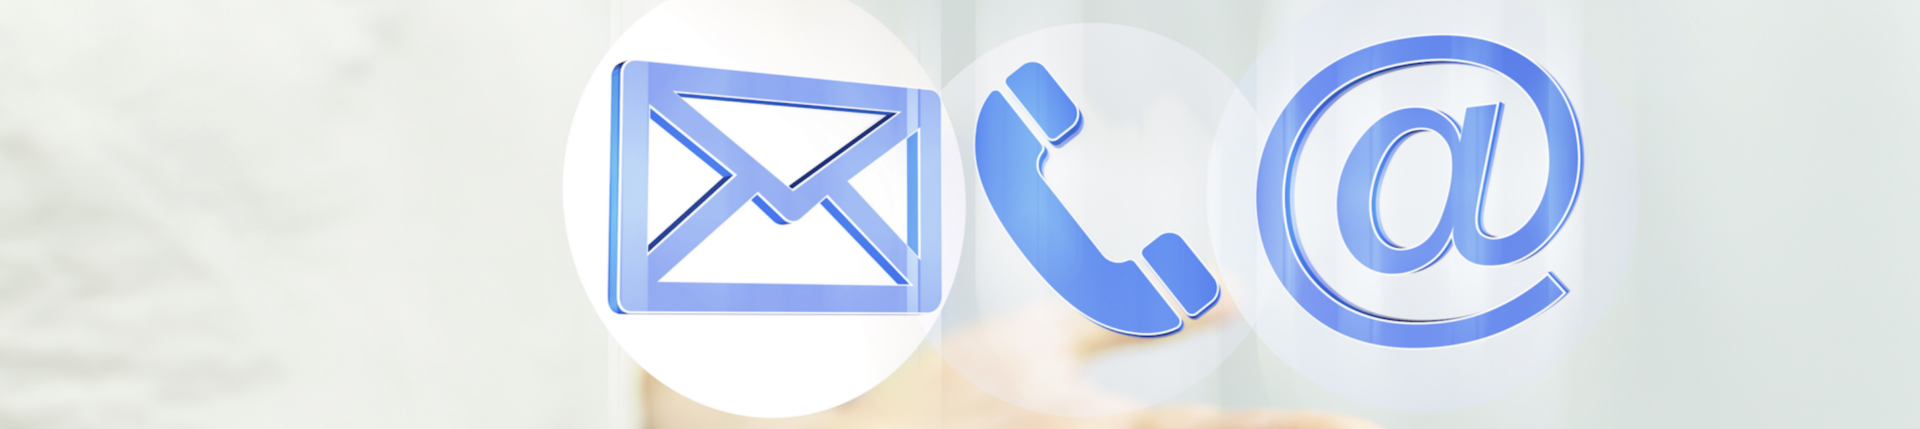 an image with 3 different icons to show you can call, email or @ someone. 